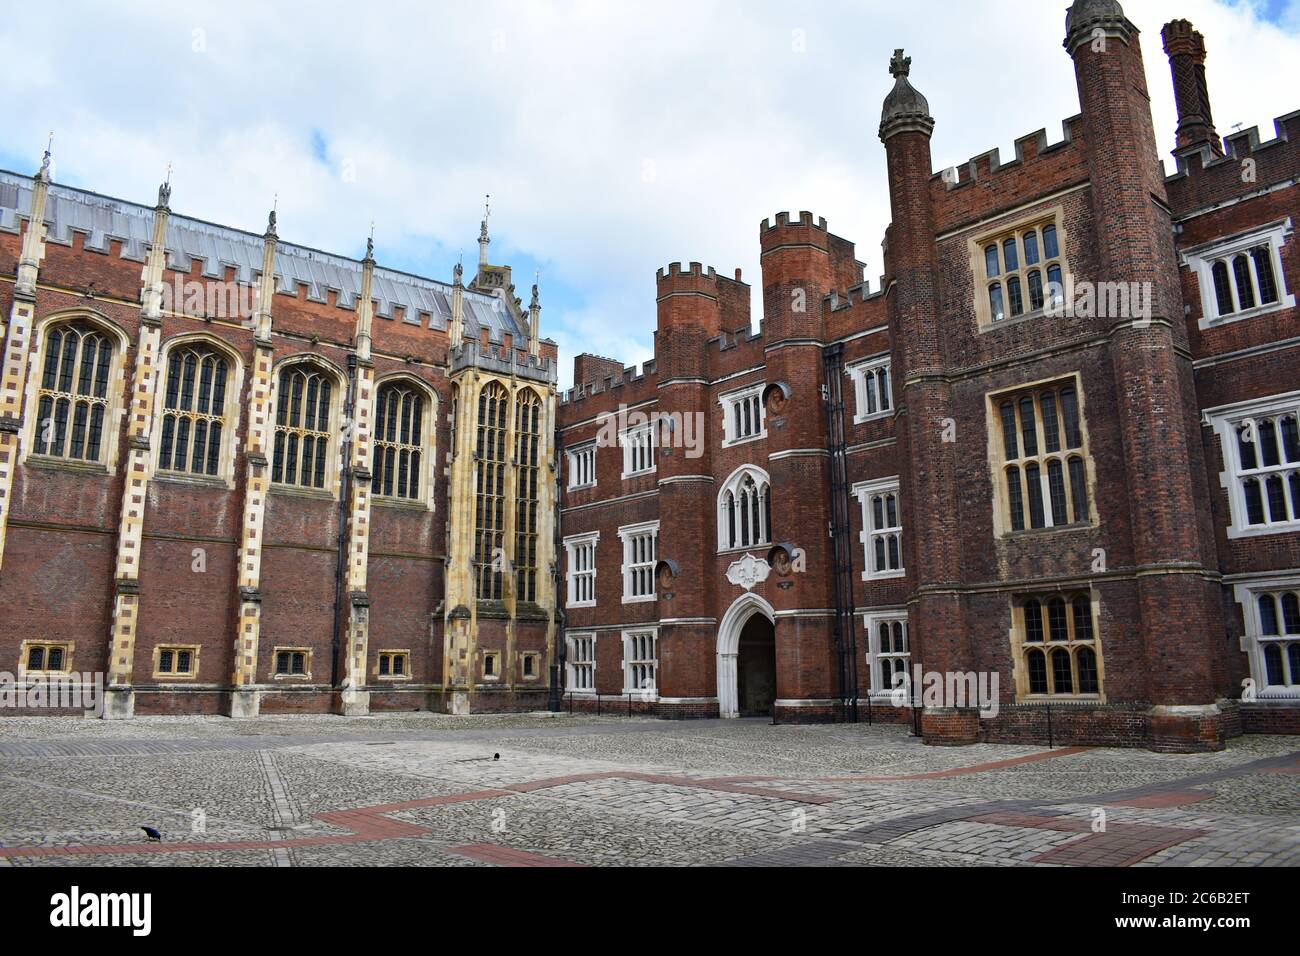 The Great Hall and Henry VIII's living quarters seen from the Clock Court in Hampton Court Palace, London. Tudor architecture and brickwork. Stock Photo